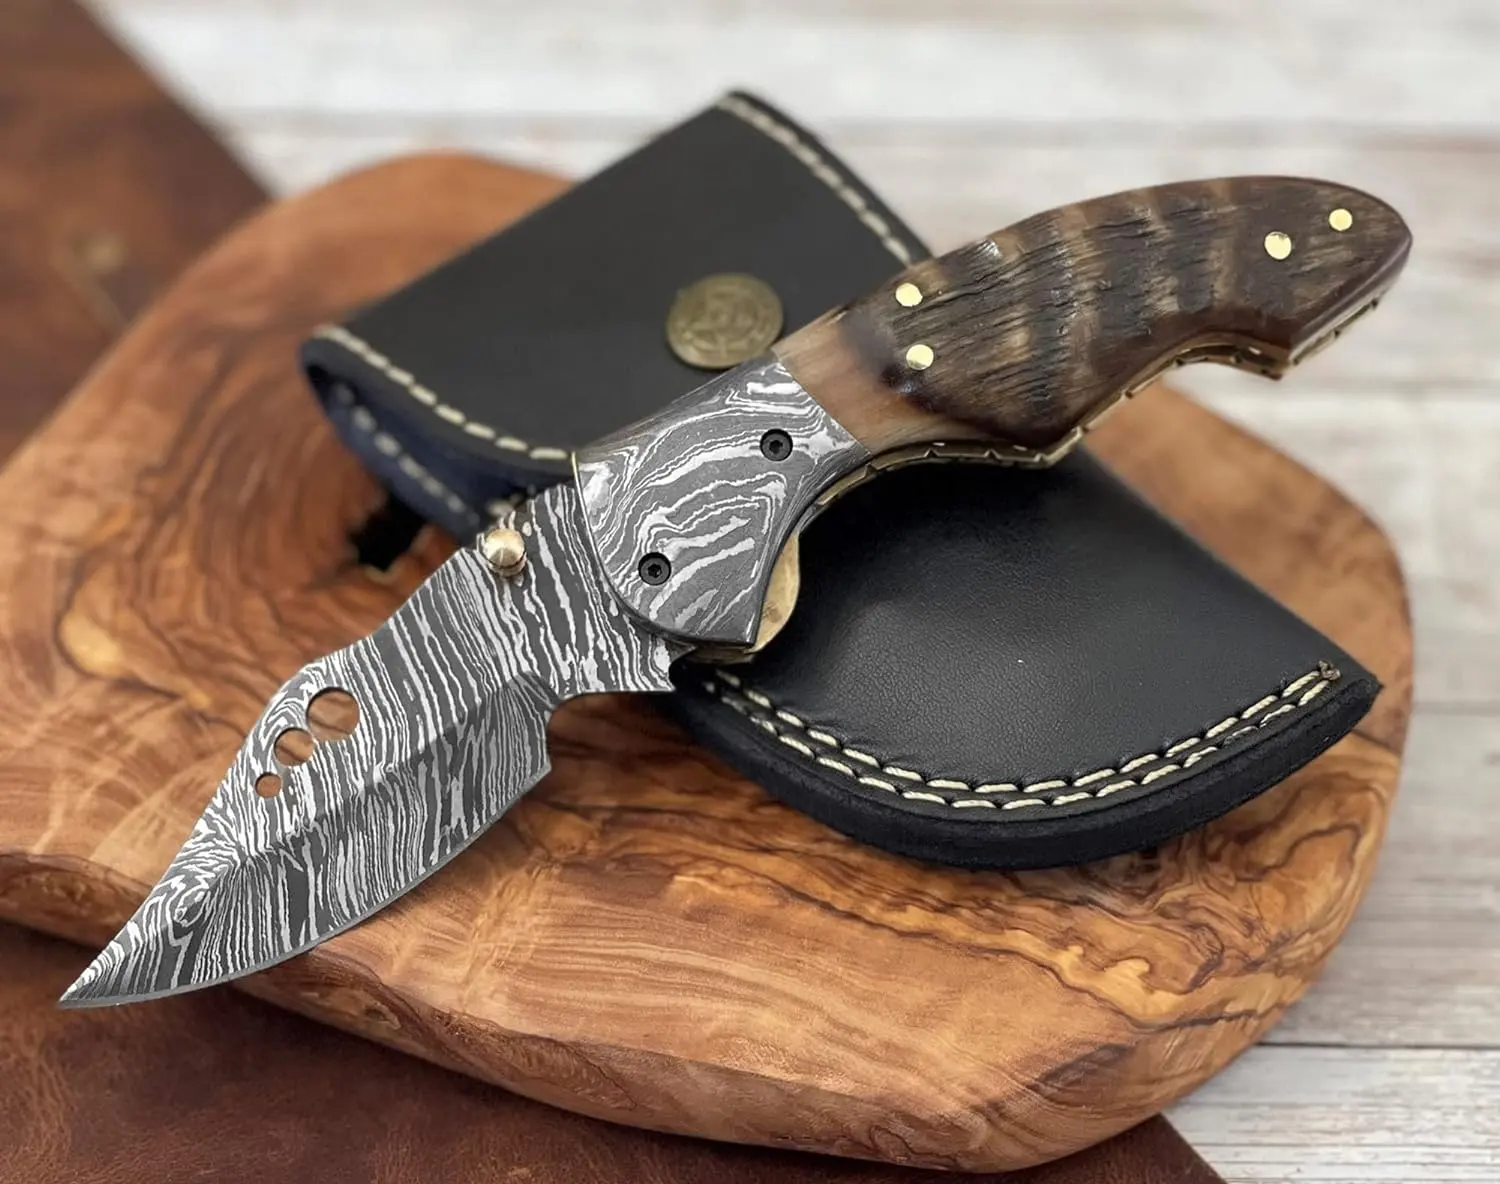 Custom handmade Damascus steel pocket knife 3 inch blade and handle ram horn with cork opener spring and fine leather sheath.